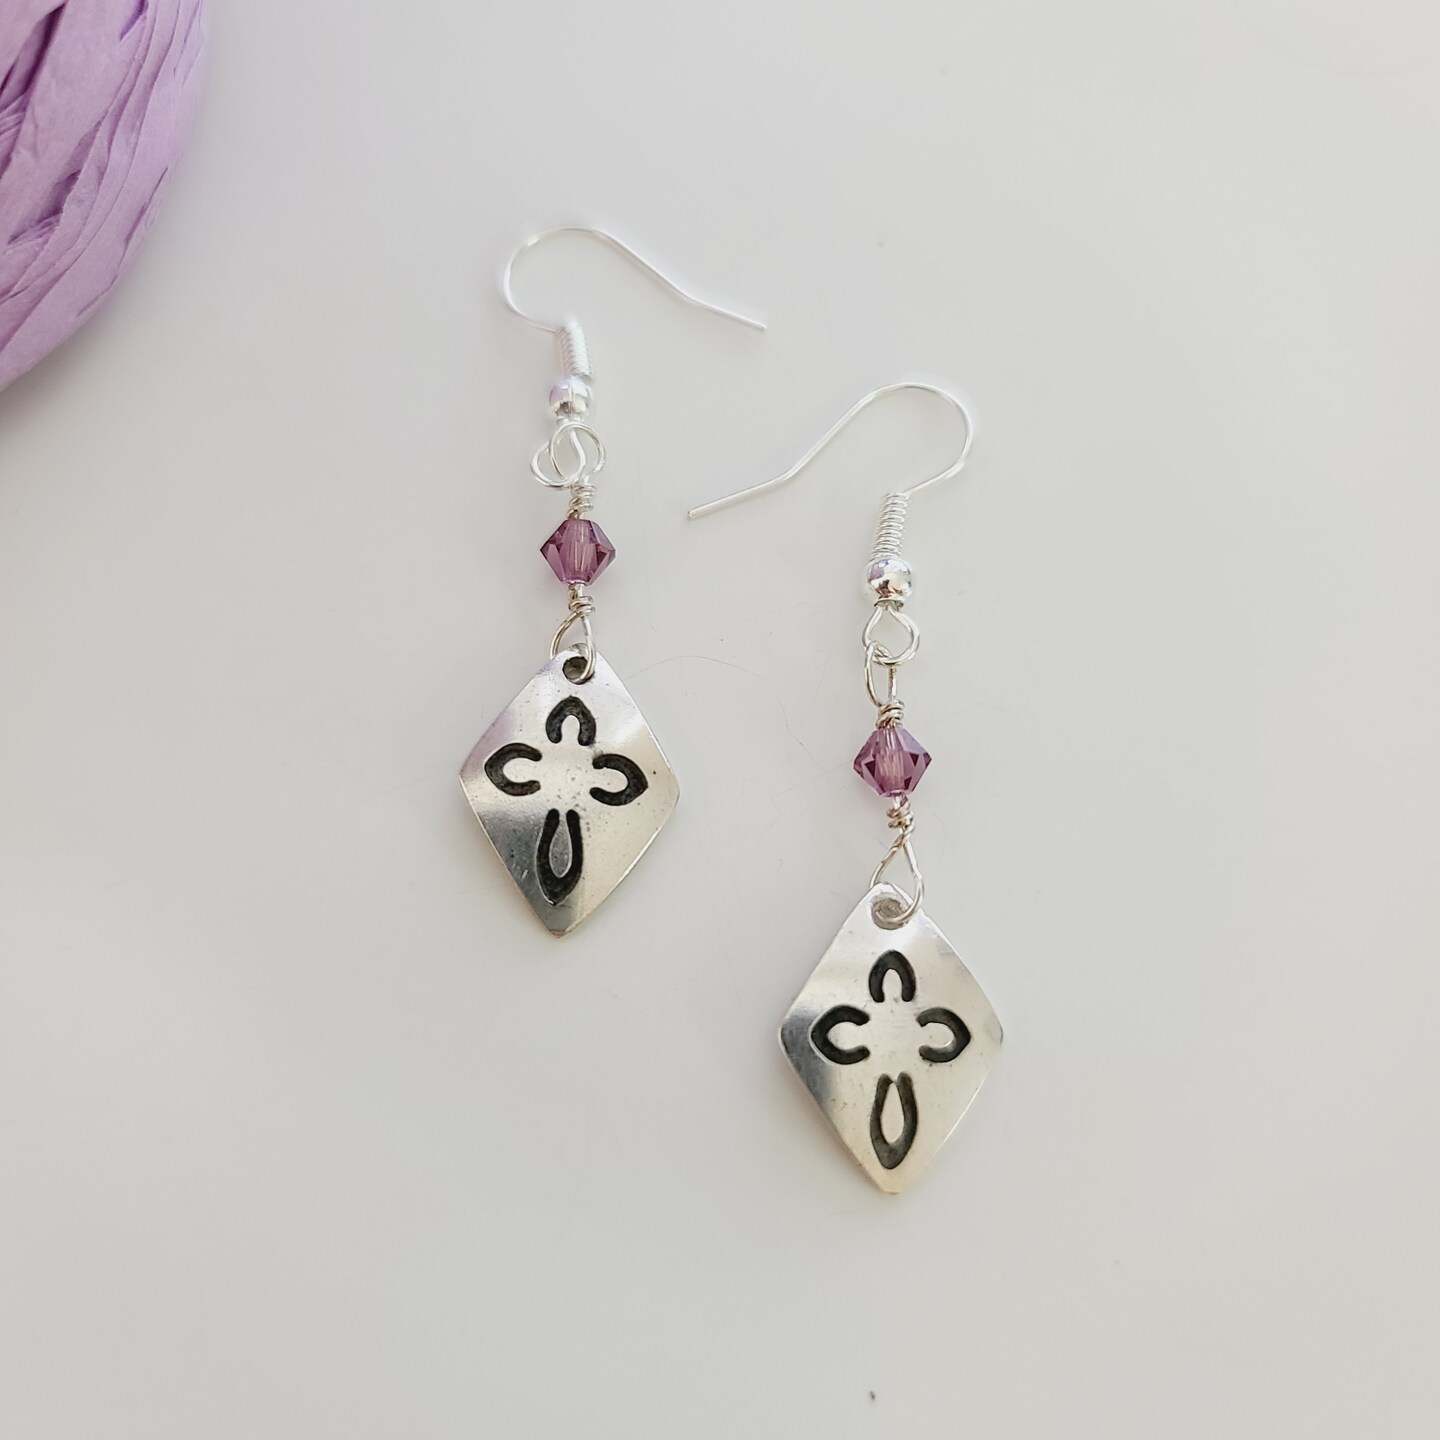 Silver and Gold, Dangle Earrings, Fine Silver Precious Metal Clay (PMC)  Designs, Free Shipping